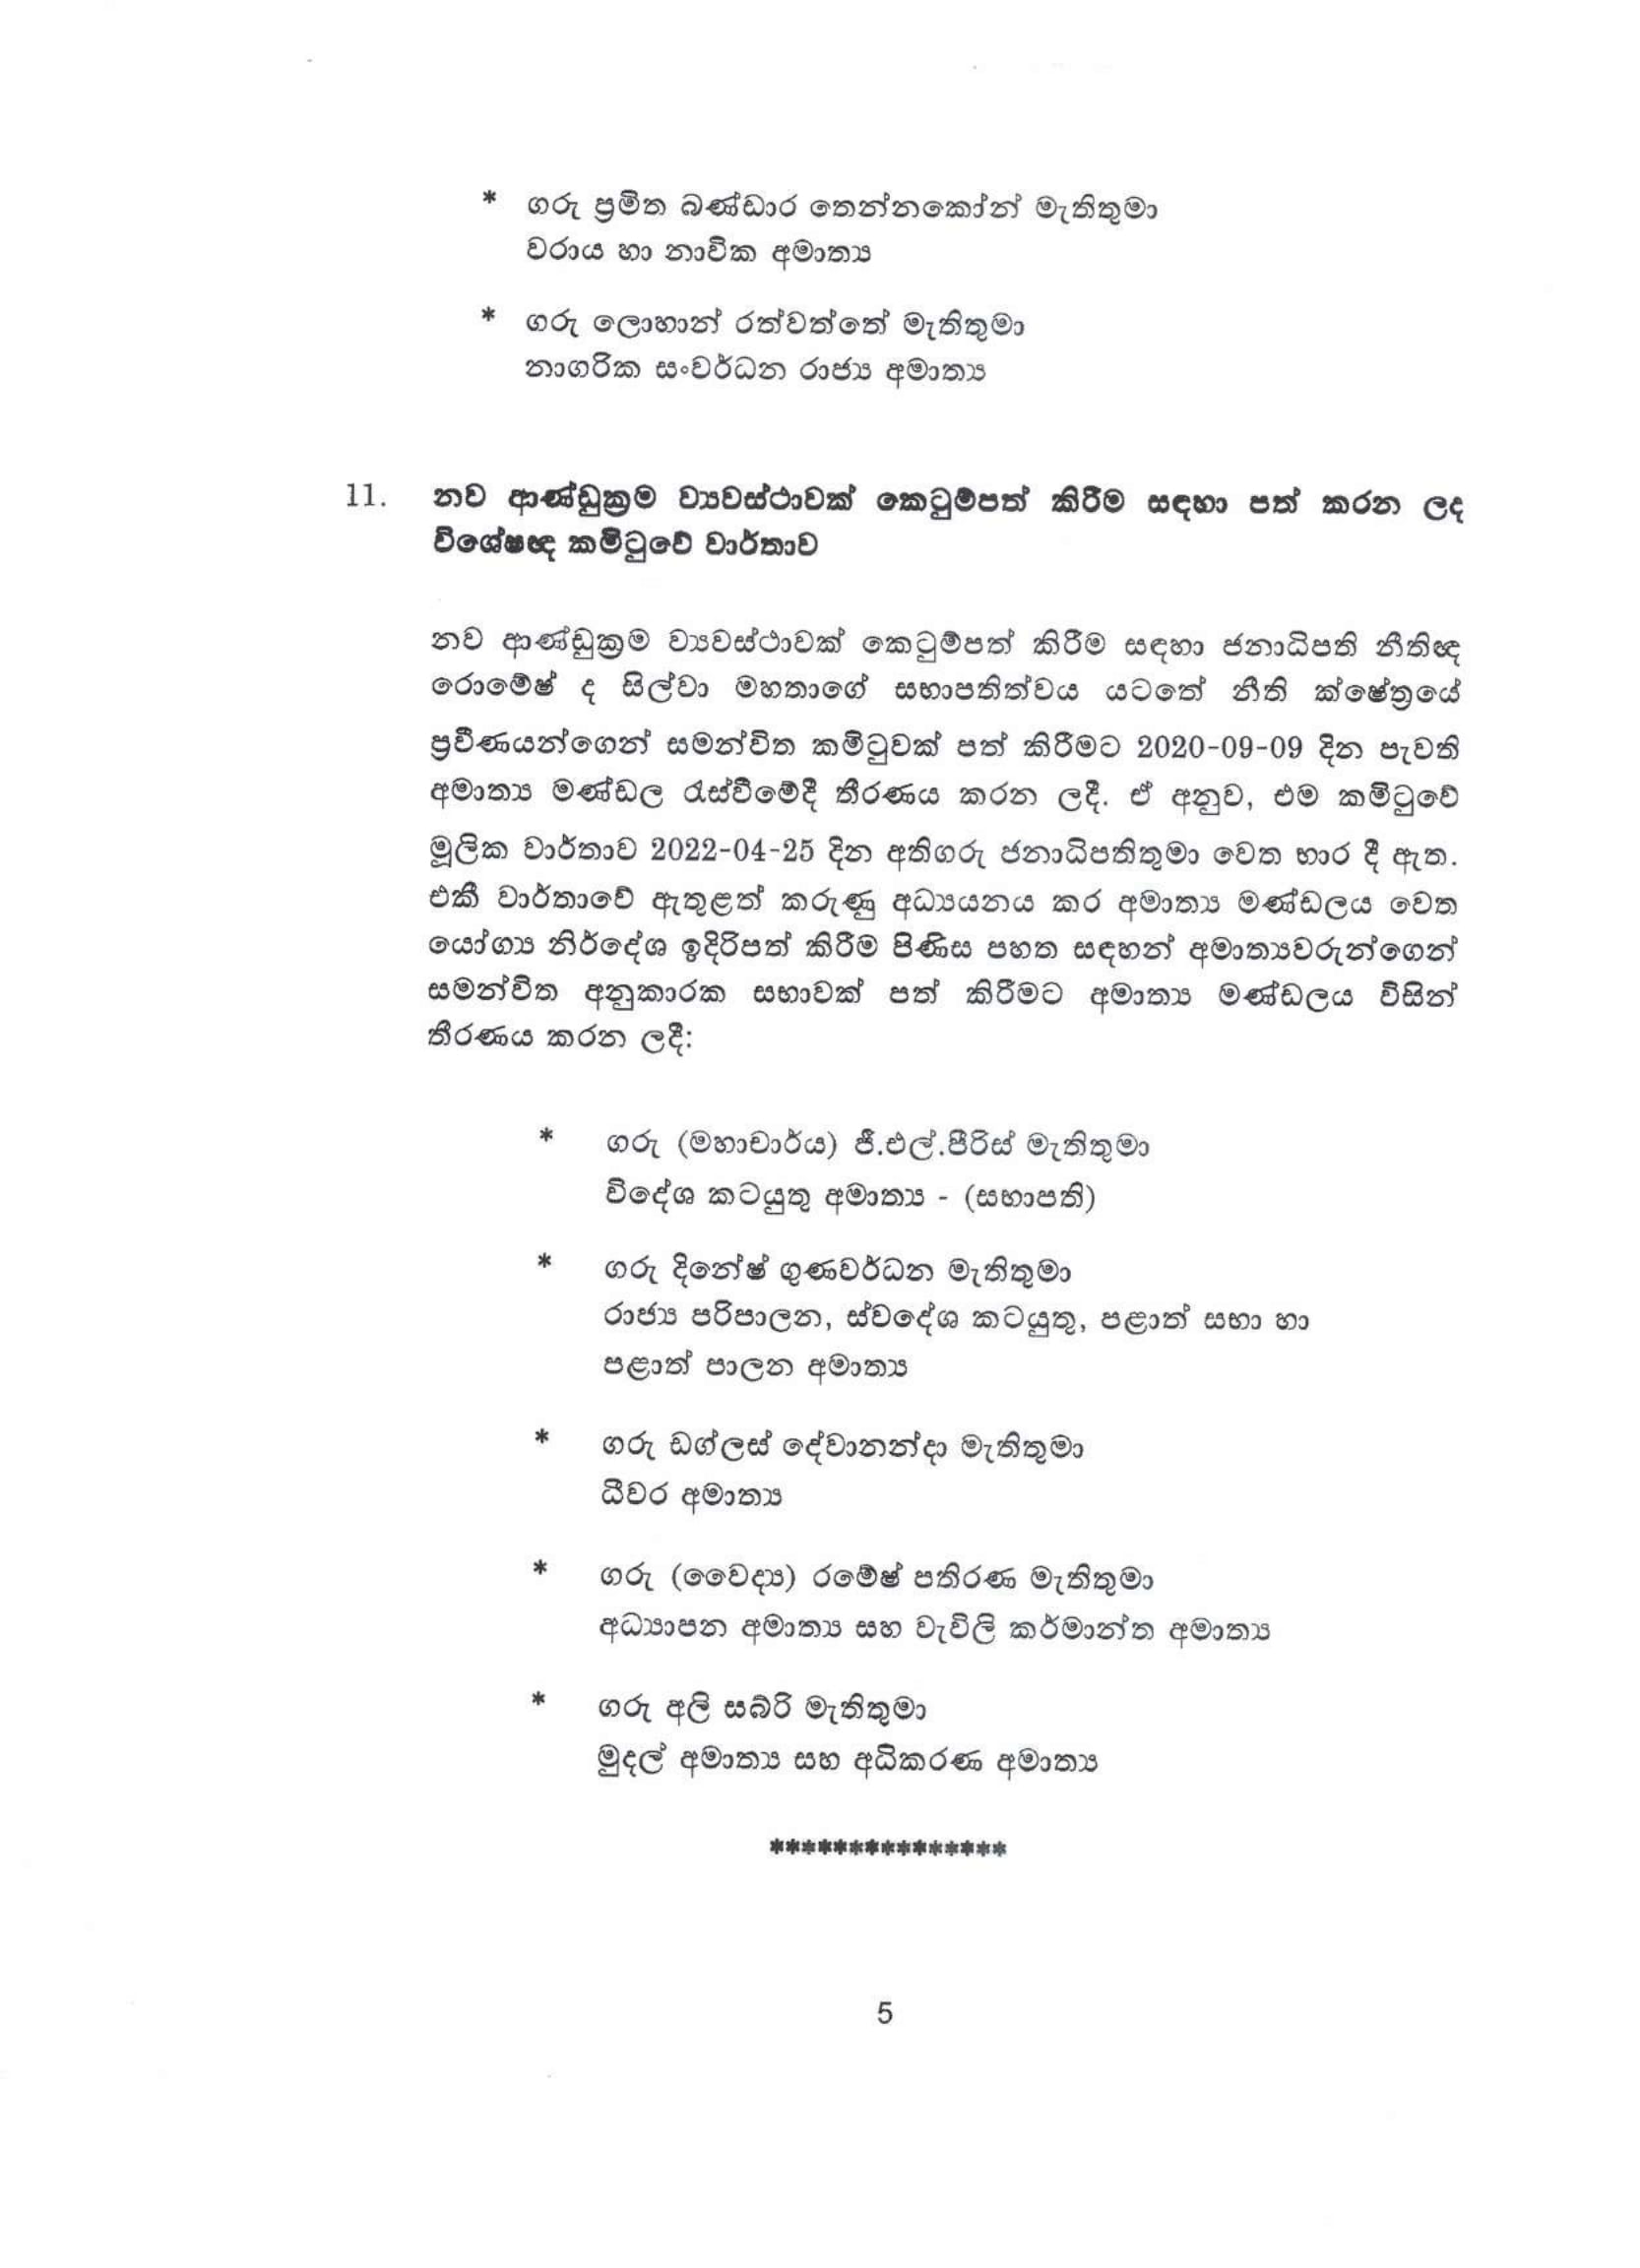 Cabinet Decisions on 02.05.2022 5